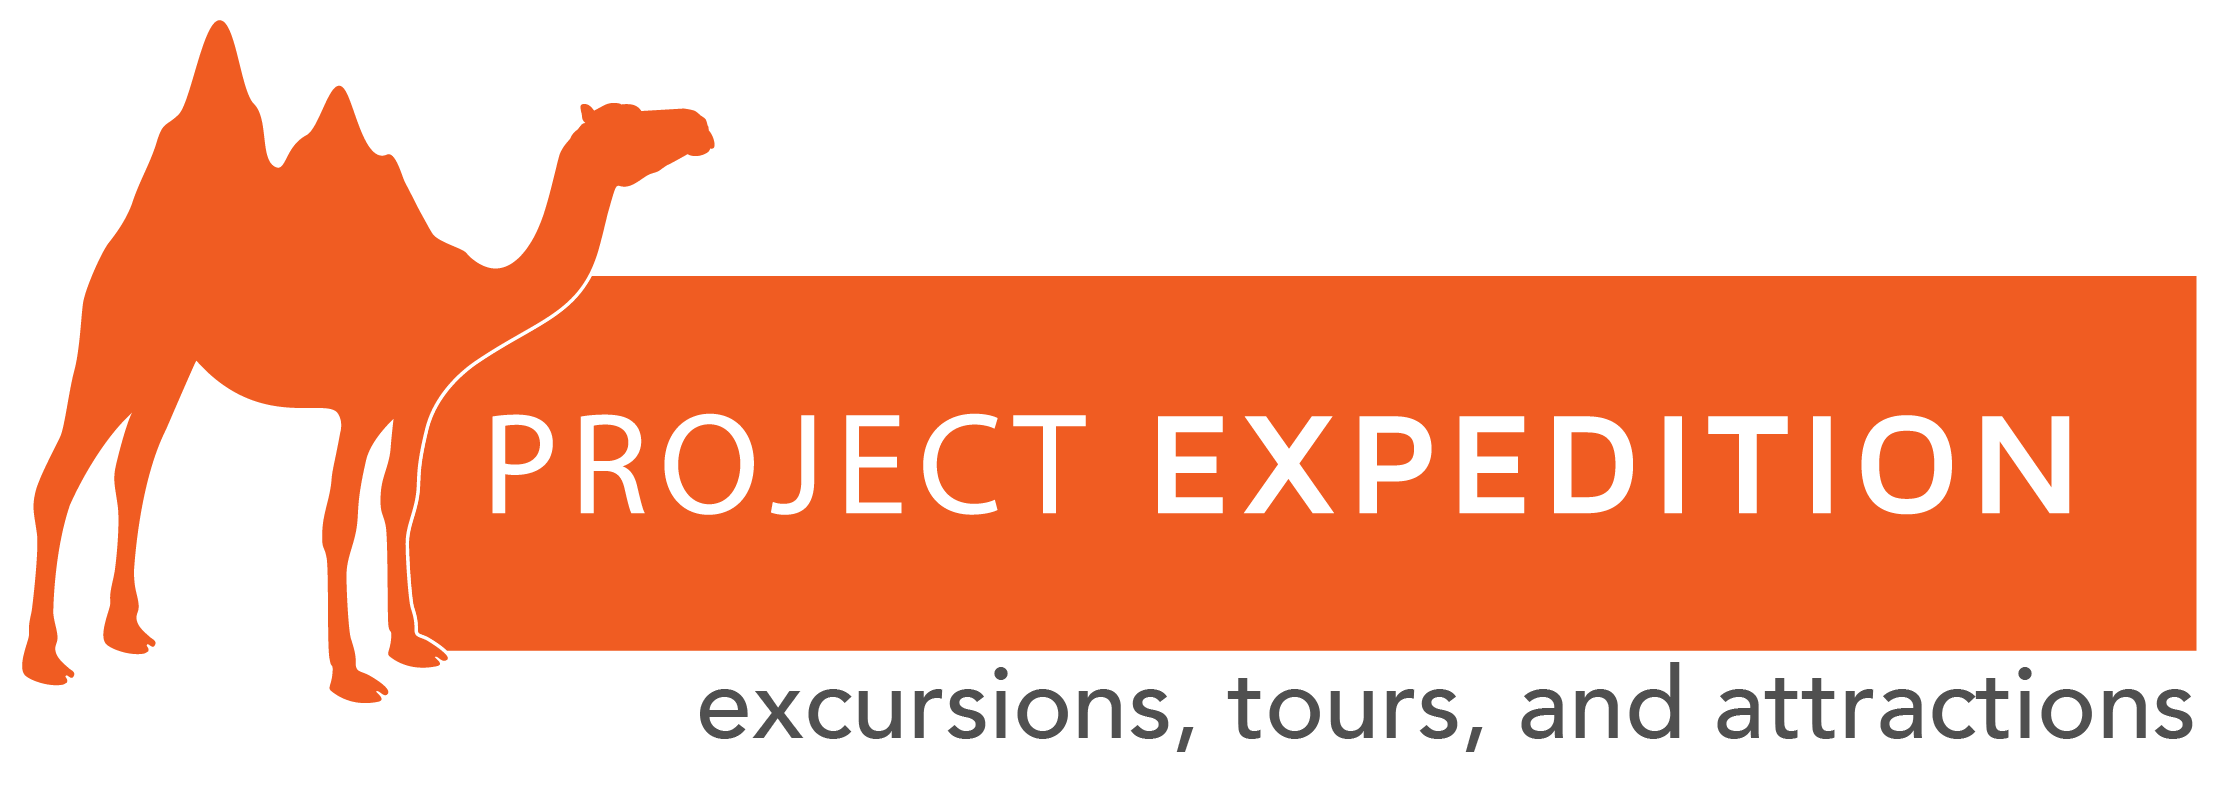 ProjectExpedition